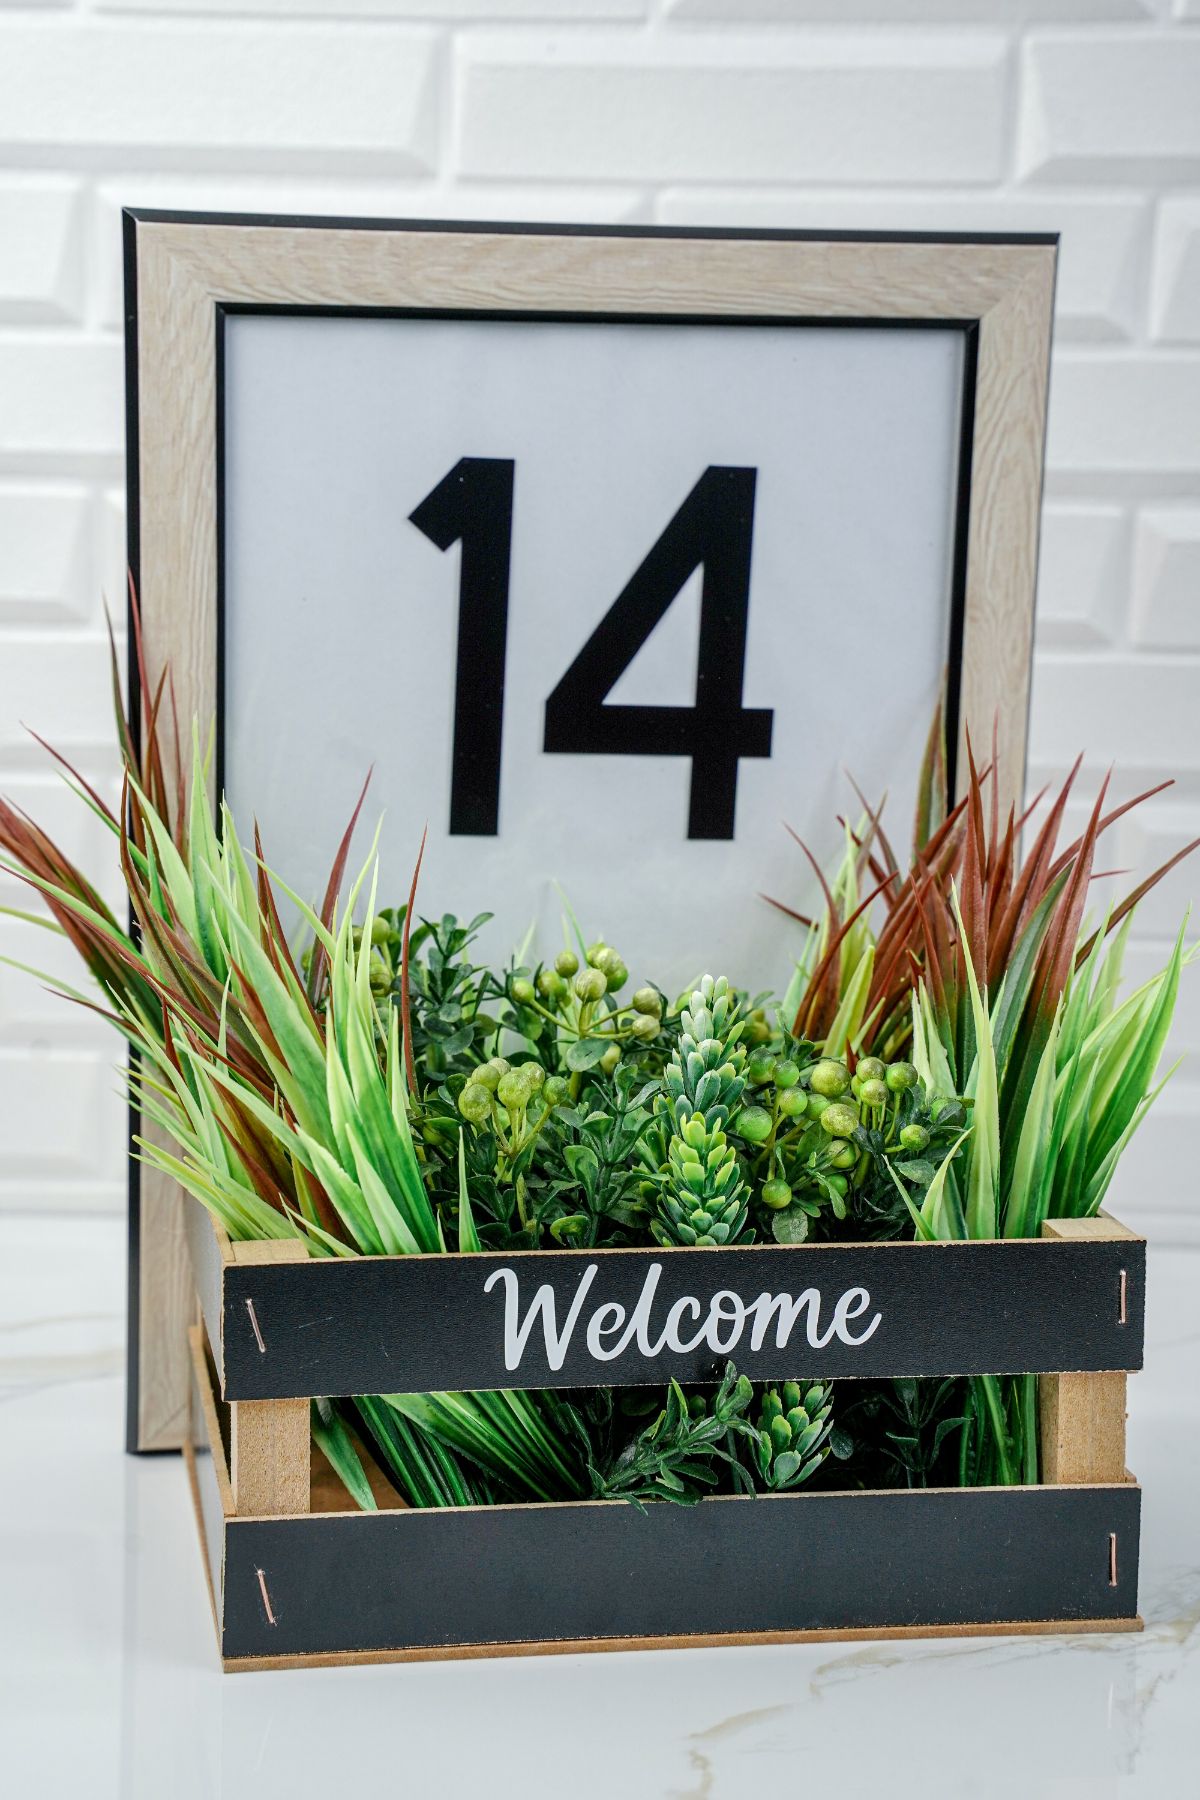 black basket with white welcome message on front of framed house number sign